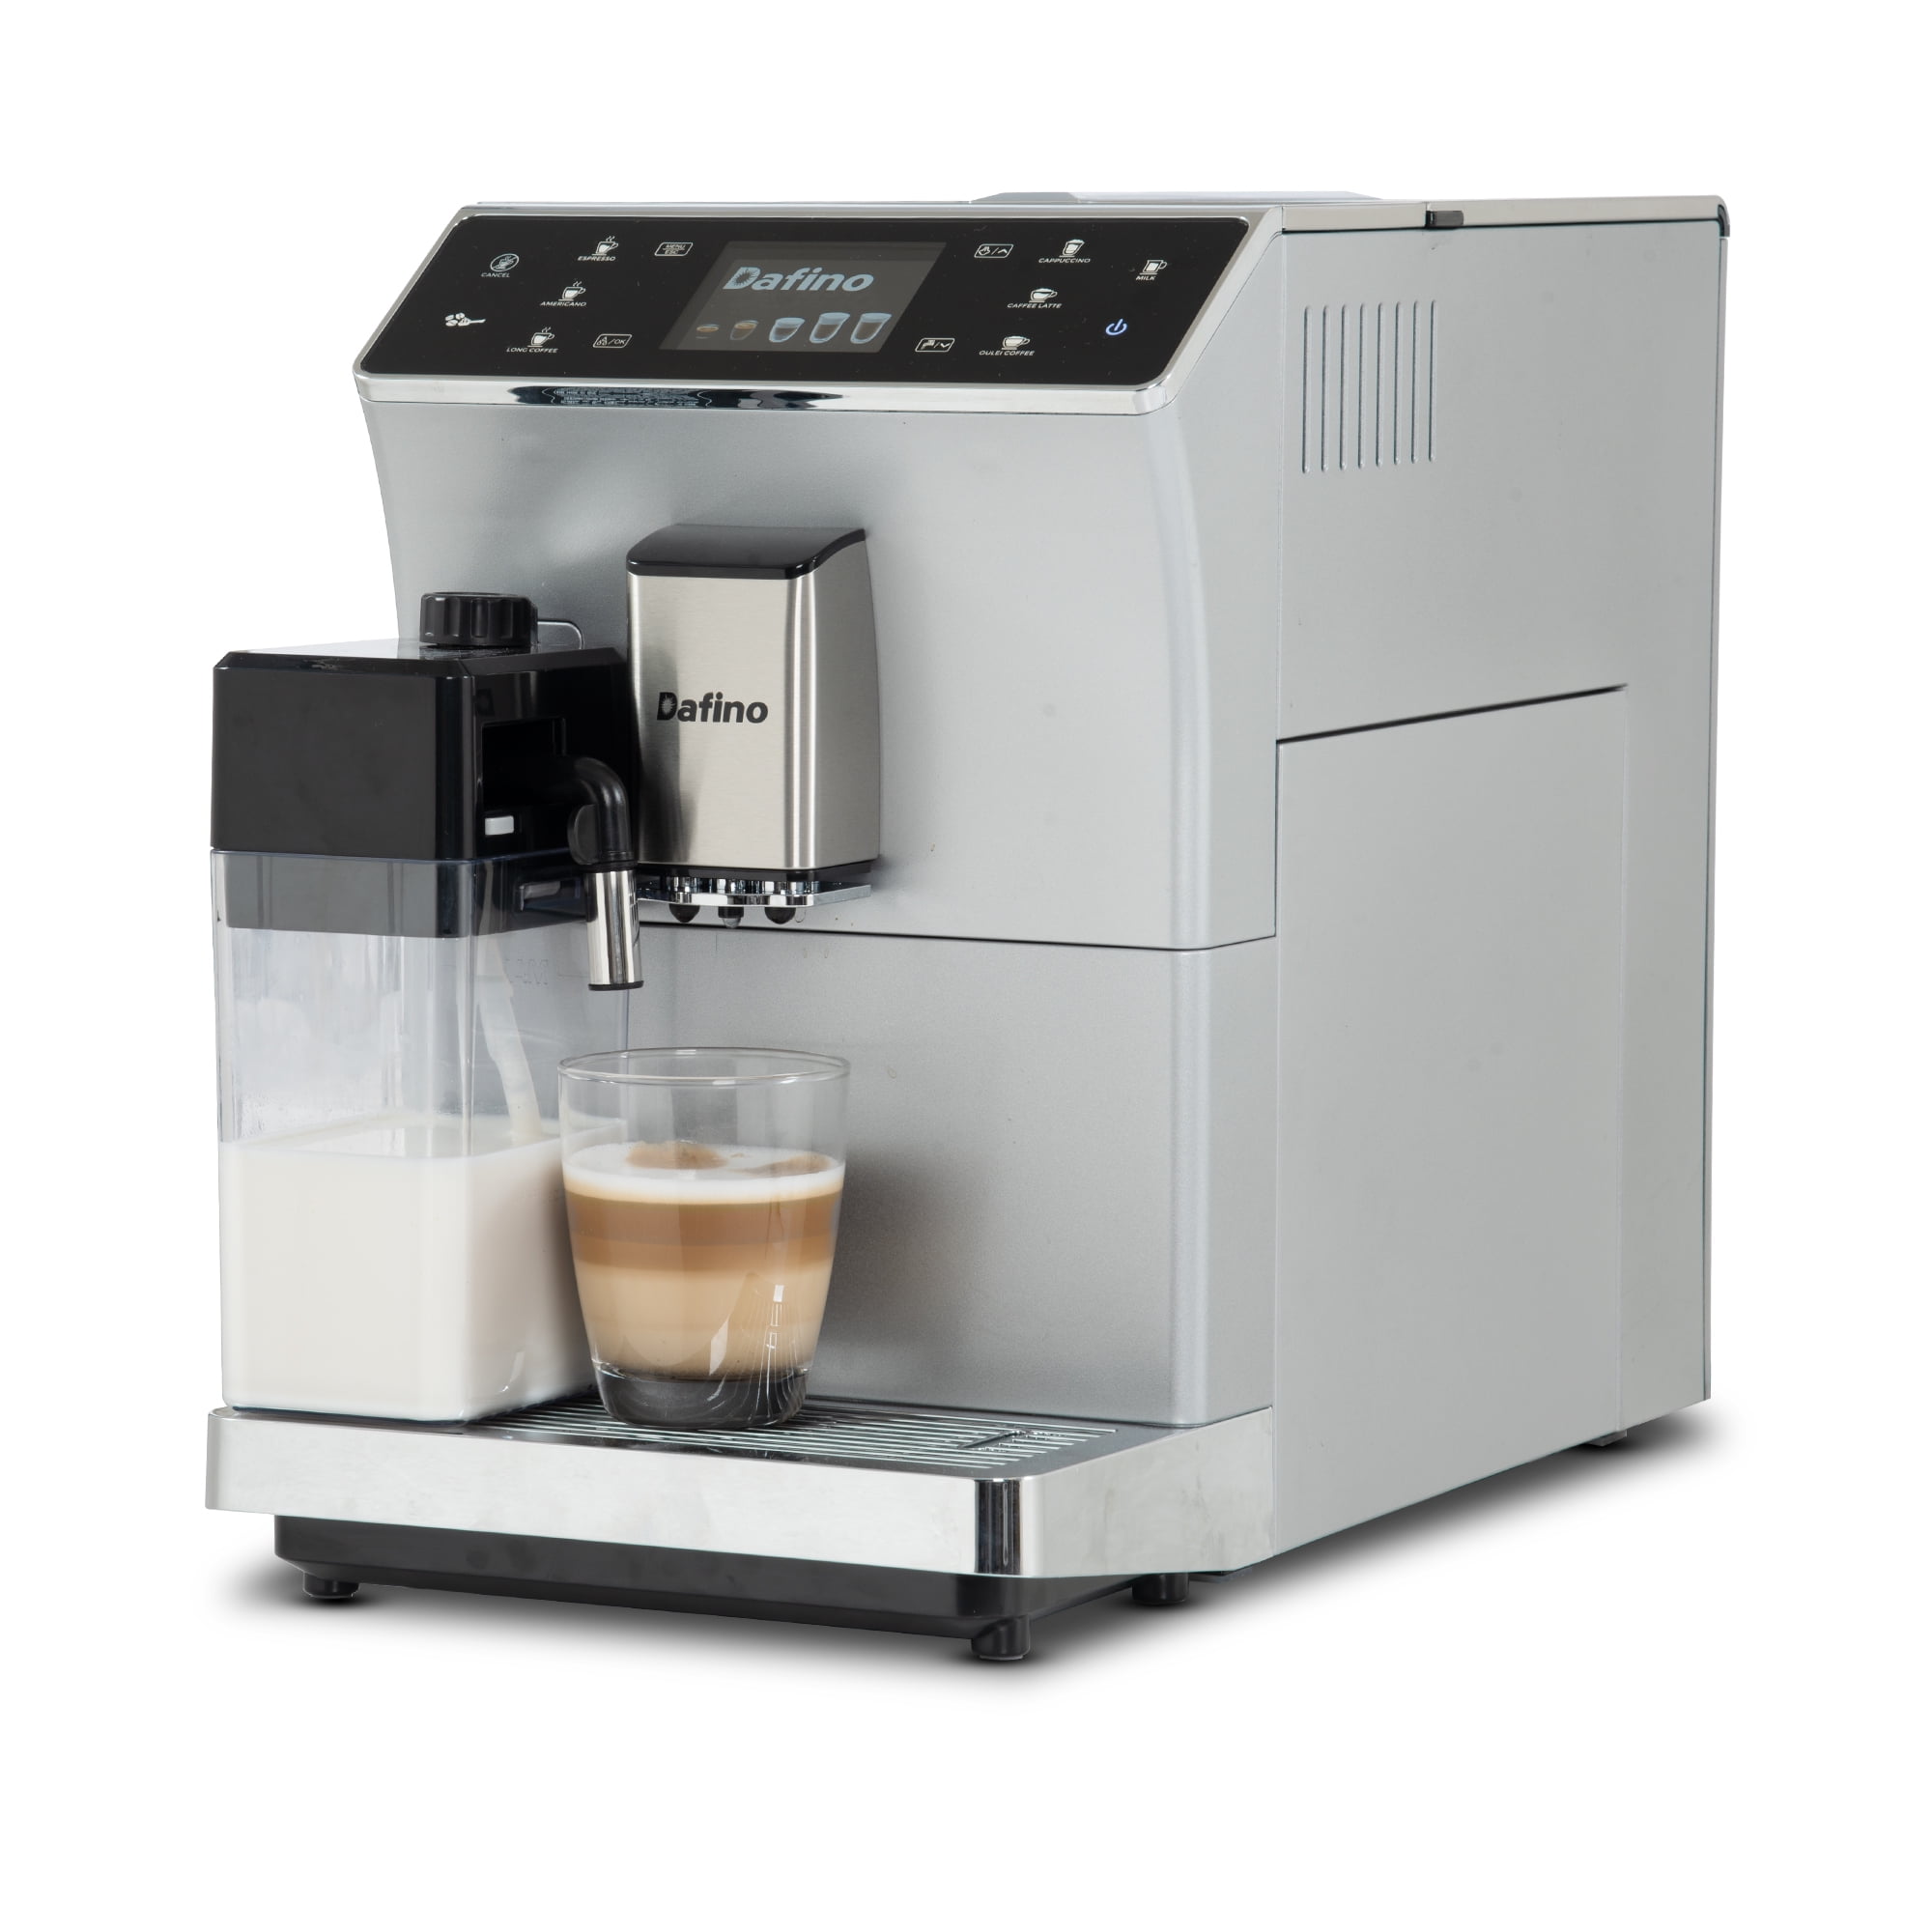 DEVISIB Professional All-in-One Espresso Coffee Machine Americano Maker  with Bean Grinder and Milk Frother – Sailor Sludge Gourmet Coffee